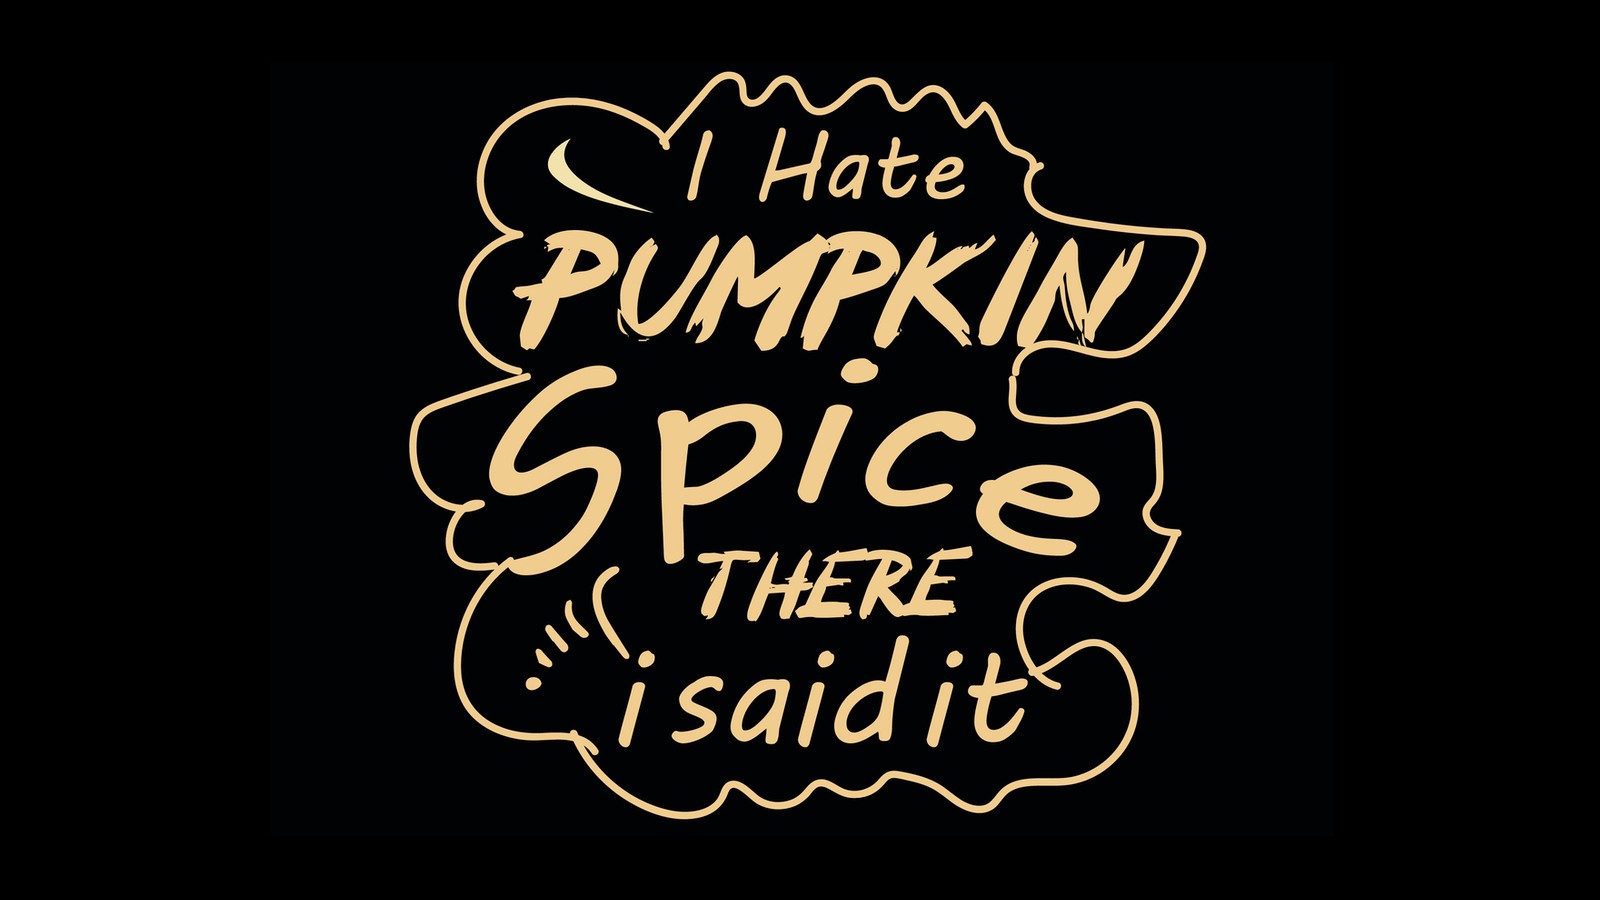 Best Starbucks and Dunkin’ Options If You Hate Pumpkin Spice